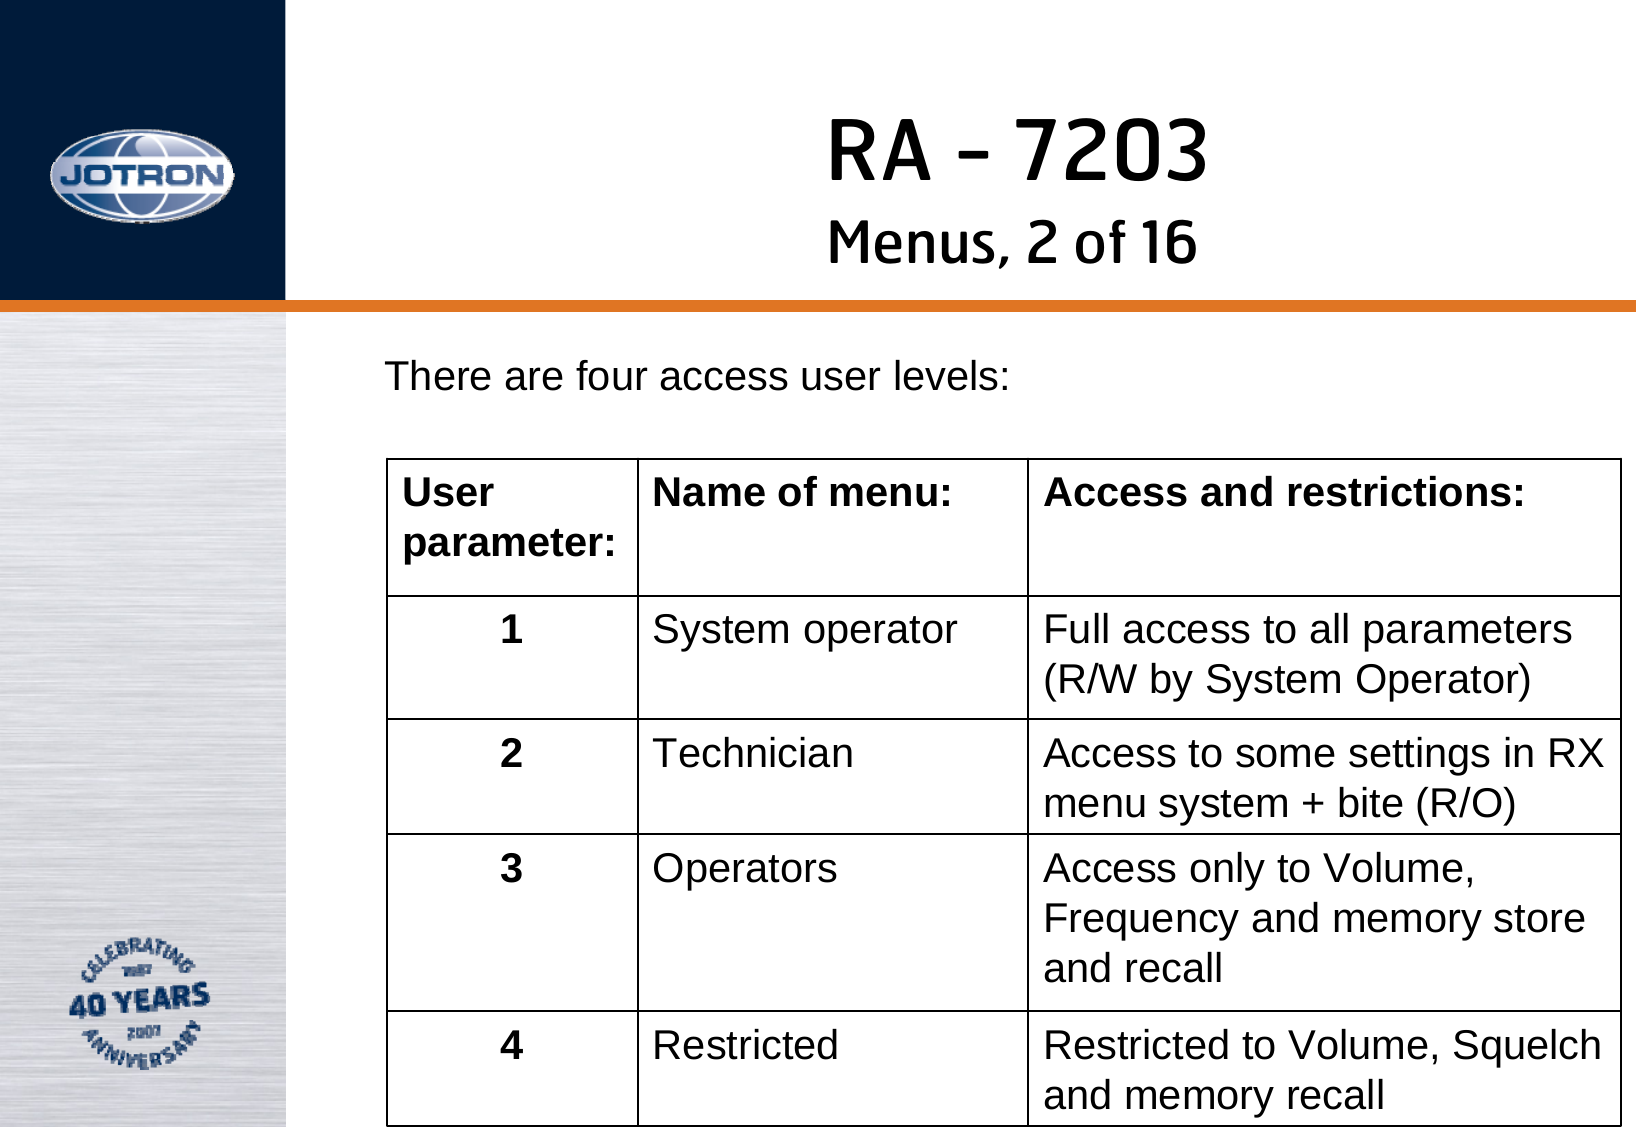 RA - 7203Menus, 2 of 16Userparameter: Name of menu: Access and restrictions:1System operator Full access to all parameters(R/W by System Operator)2Technician Access to some settings in RXmenu system + bite (R/O)3Operators Access only to Volume,Frequency and memory storeand recall4Restricted Restricted to Volume, Squelchand memory recallThere are four access user levels: